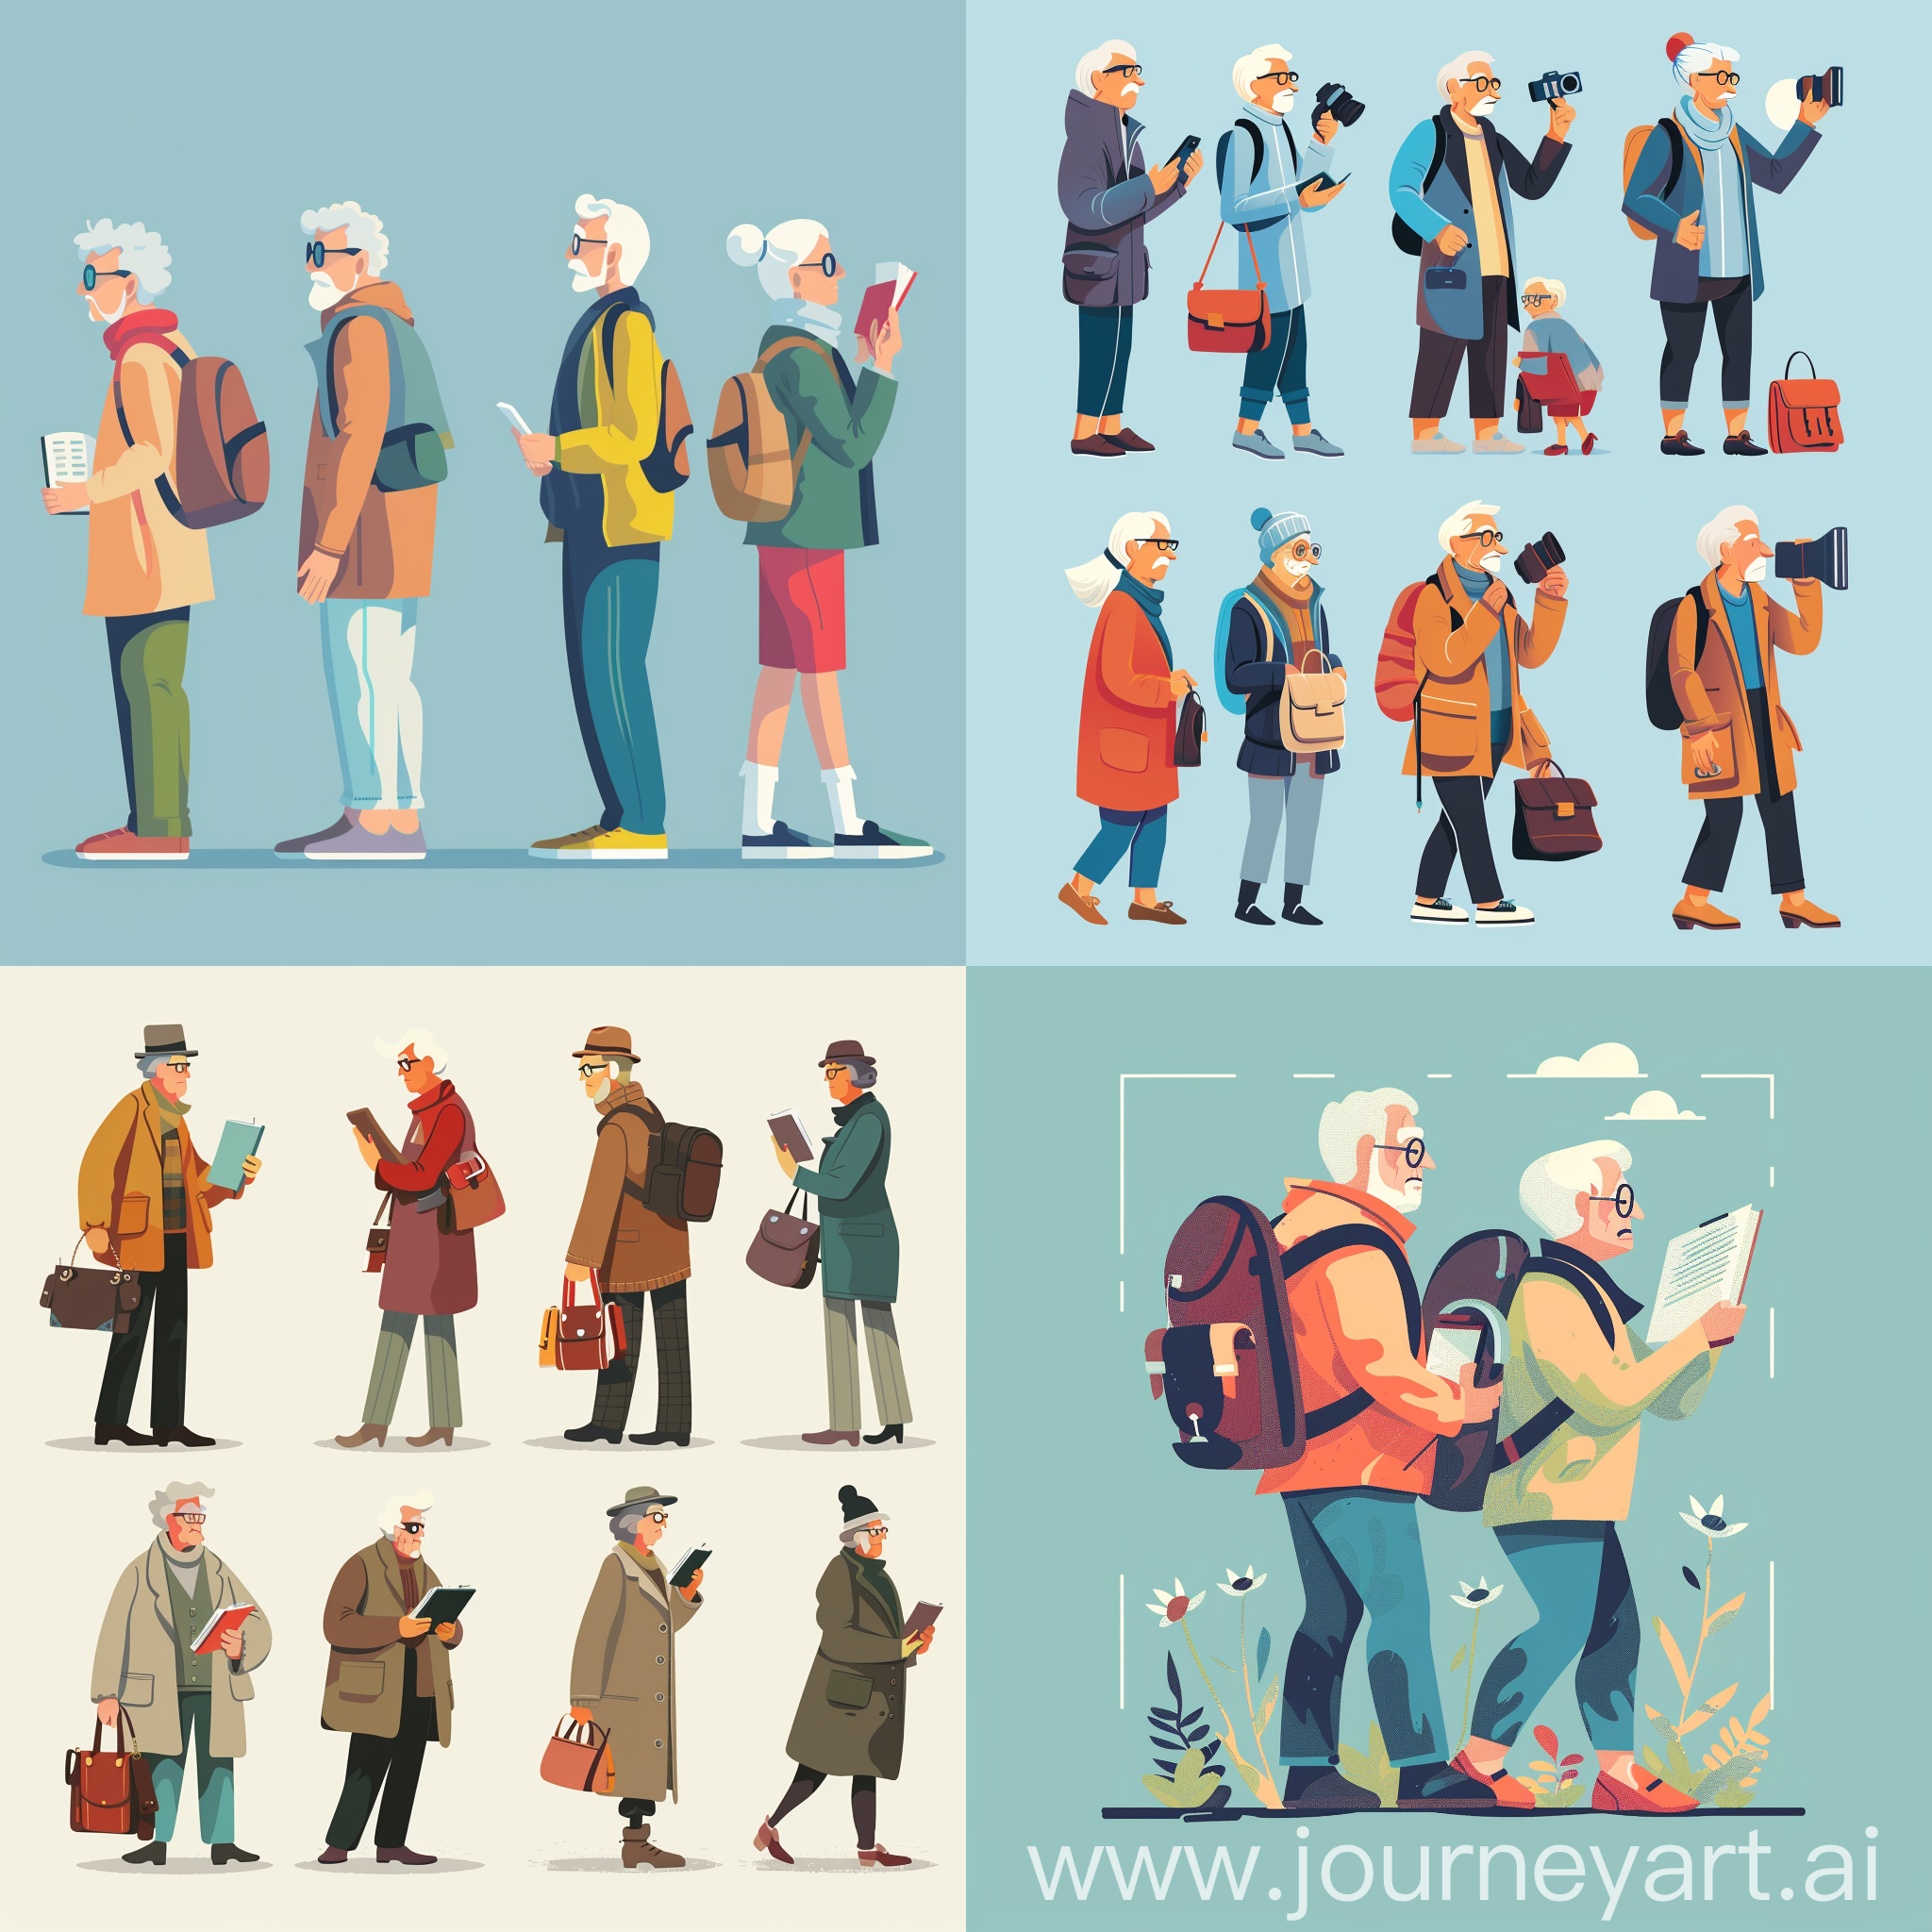 Older men and women searching for knowledge and activities to do. generate into a poster adverting where to find them